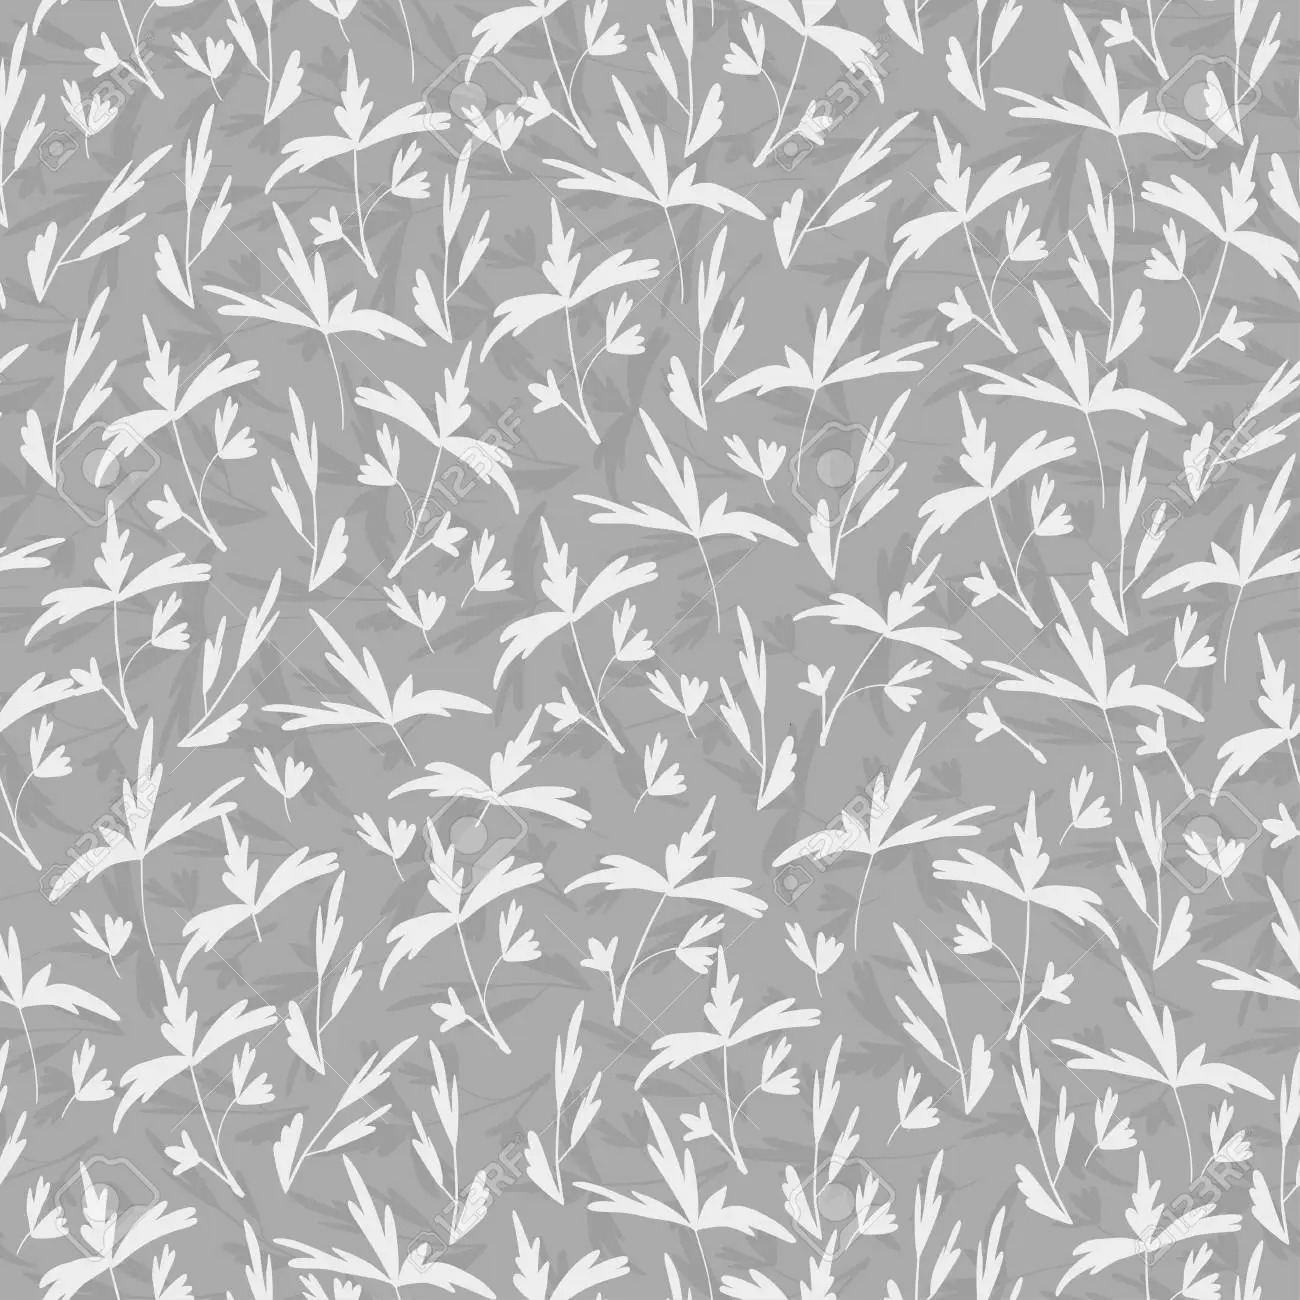 Trendy seamless floral print small grey leaves on dark grey background can be used for textile fabric wallpaper scrapbooking design vector royalty free svg cliparts vectors and stock illustration image